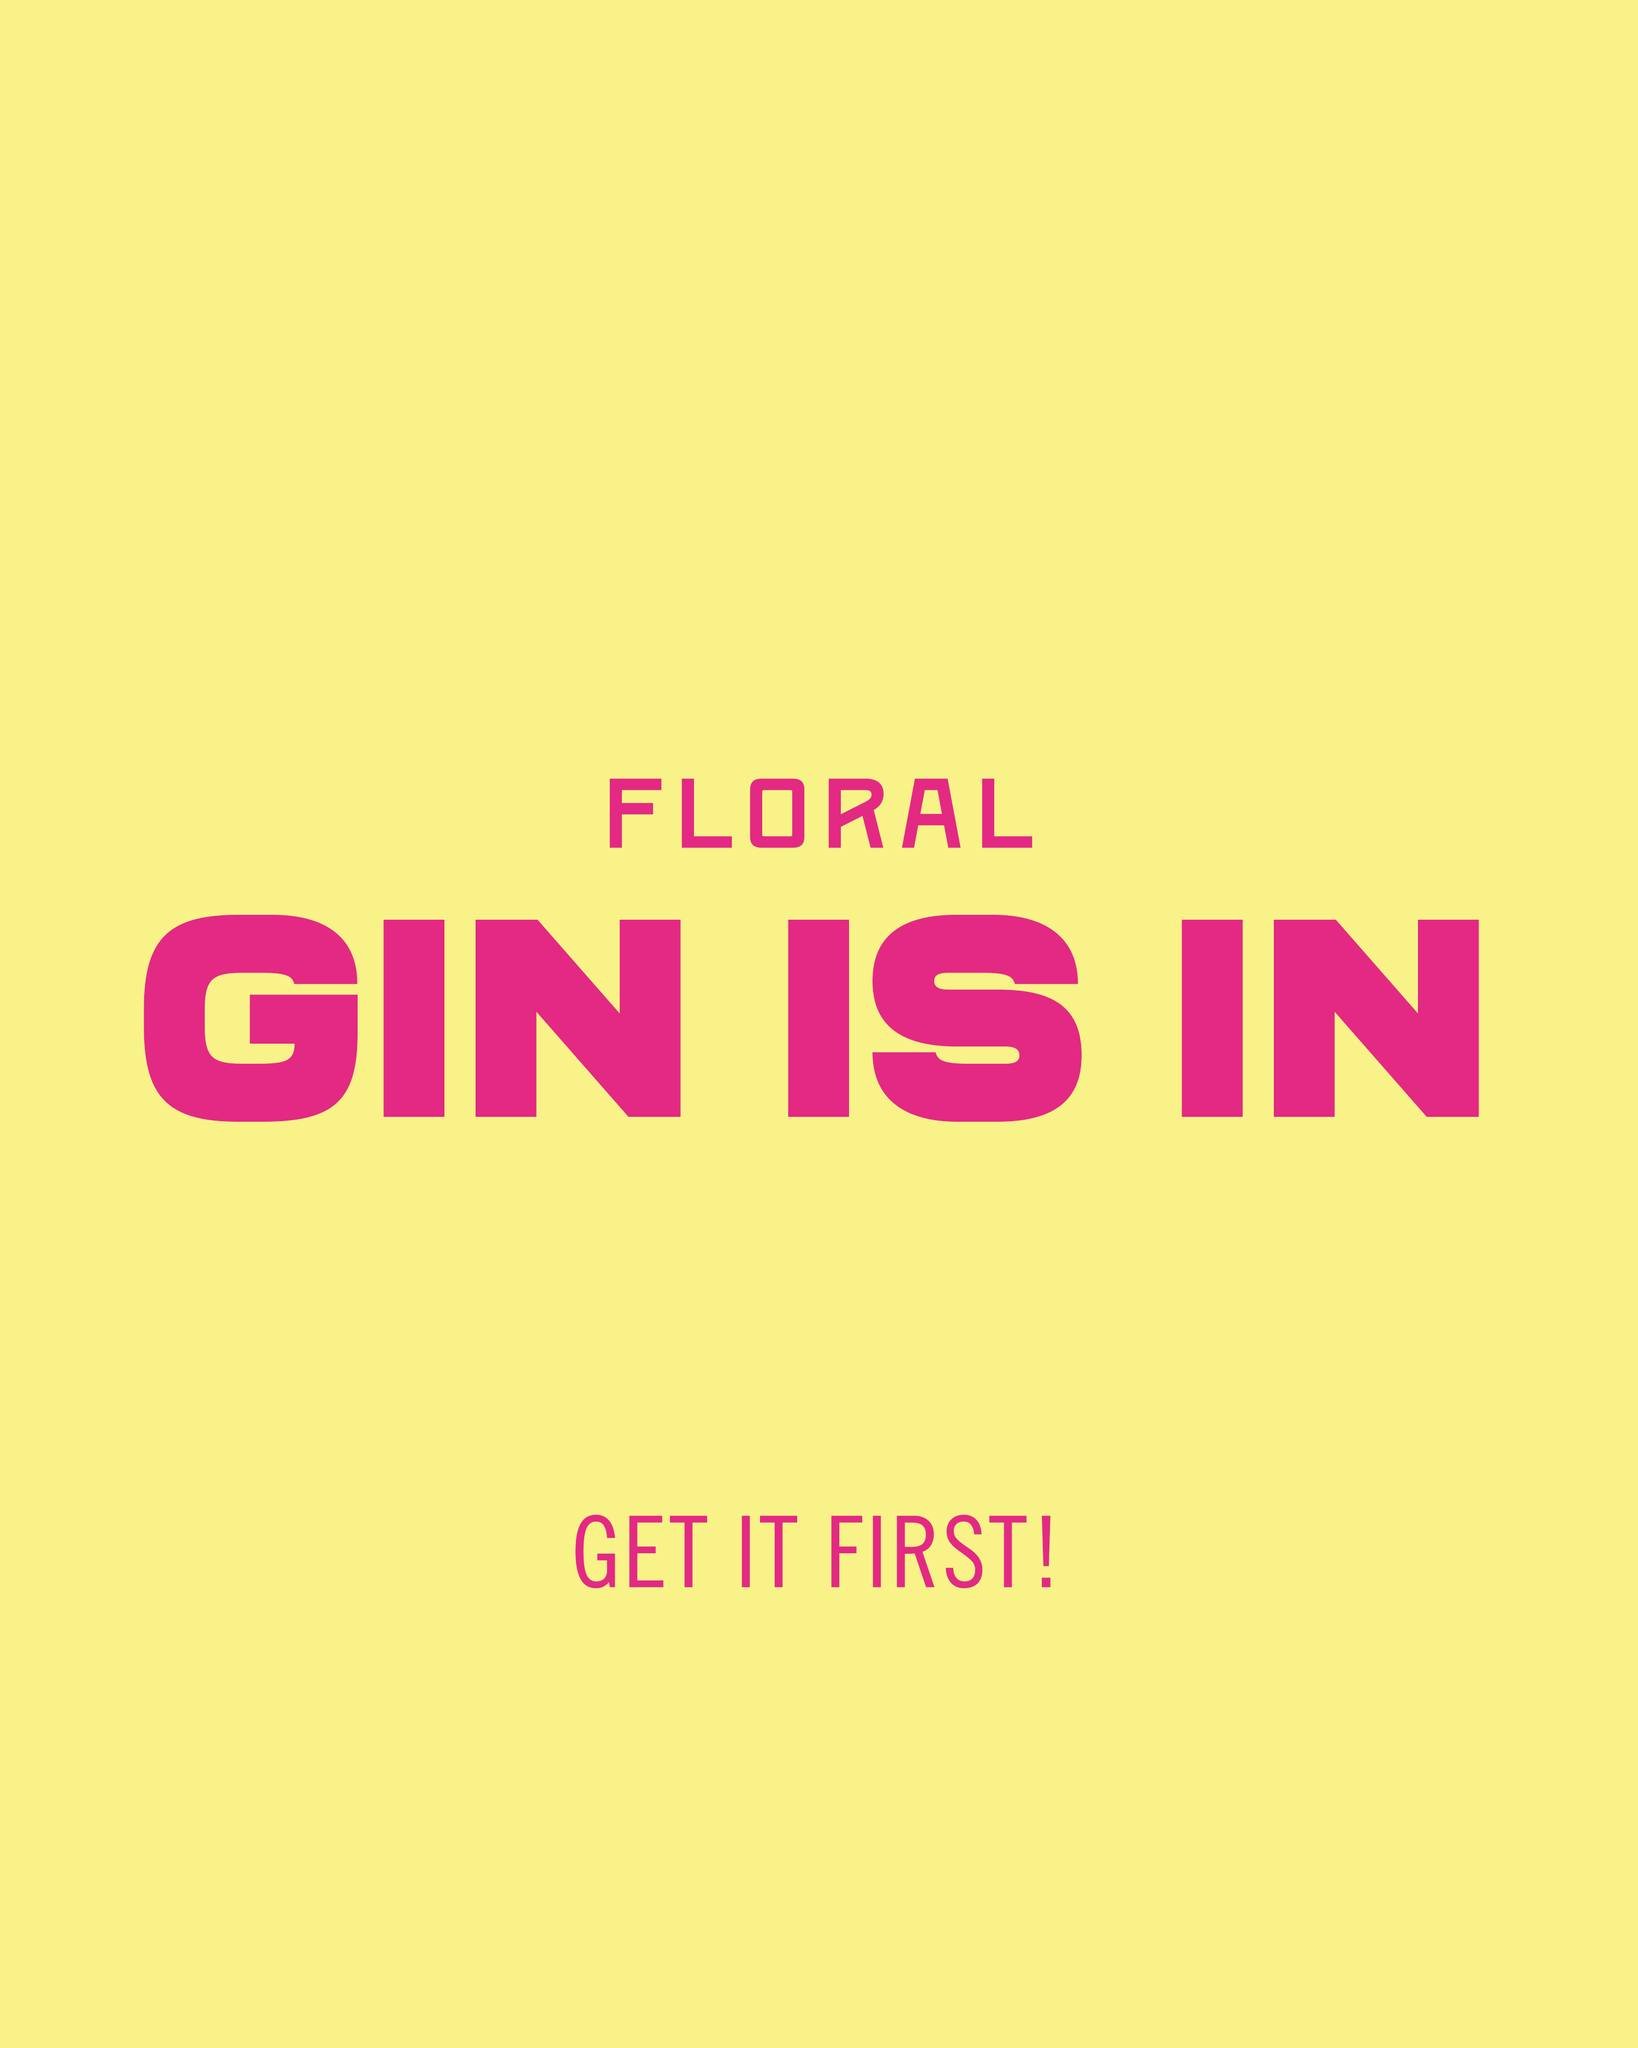 PARK&rsquo;s brand new floral gin &lsquo;Flora &amp; Fauna&rsquo; is now available on our online store, or our retail location on Banff Avenue. Delicate and soft with a lasting rose water finish. Beautifully simple with sparkling water or subtle in a